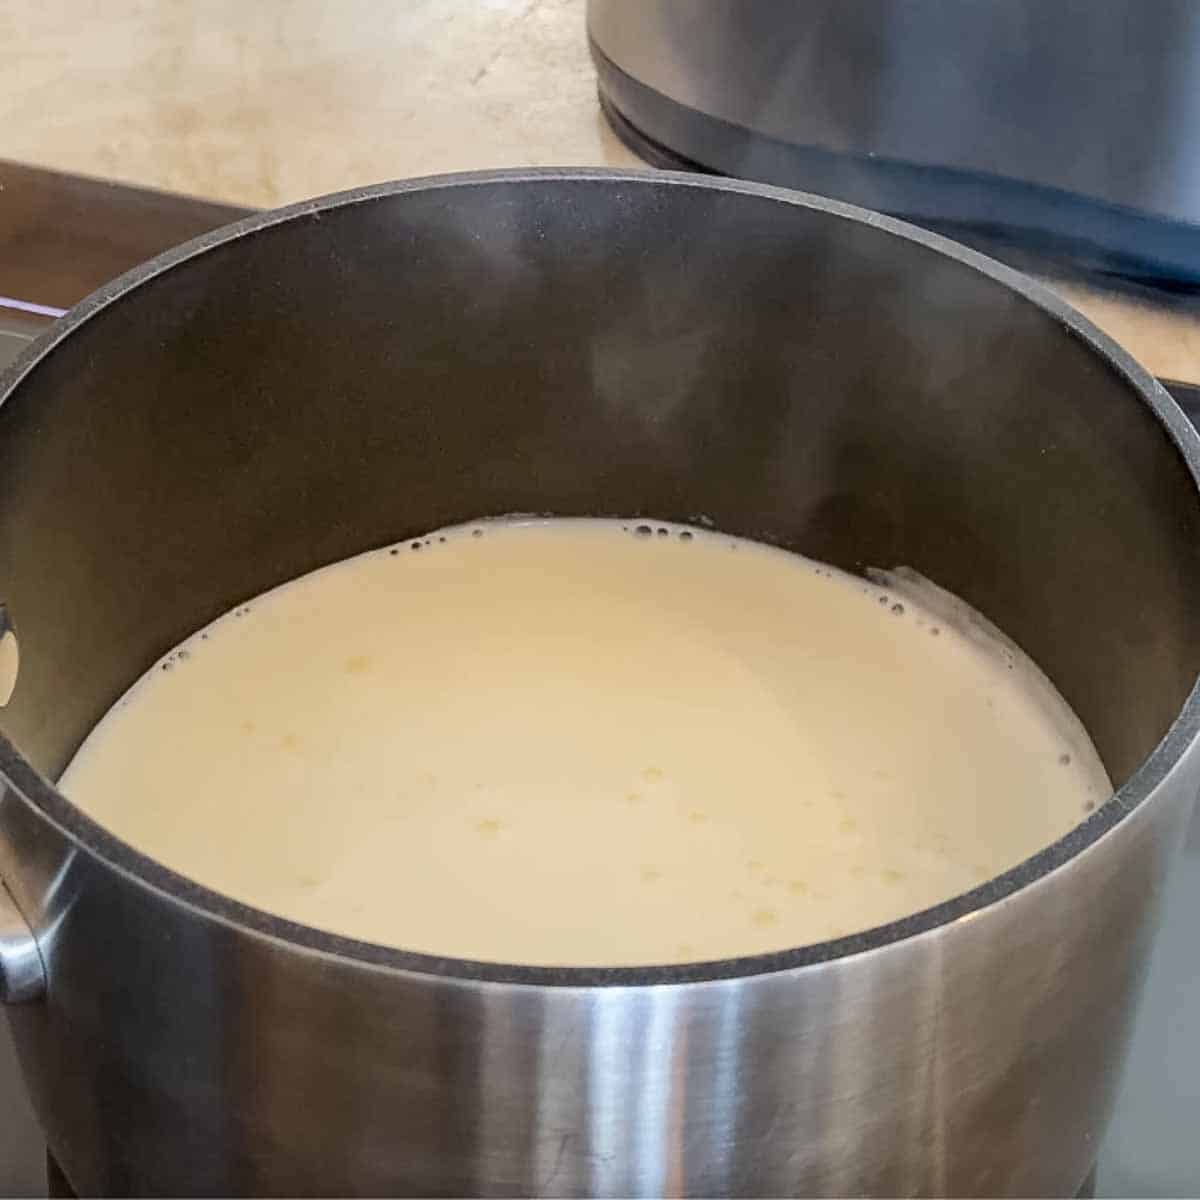 shows scalded milk - steaming and bubbling but not at a full boil